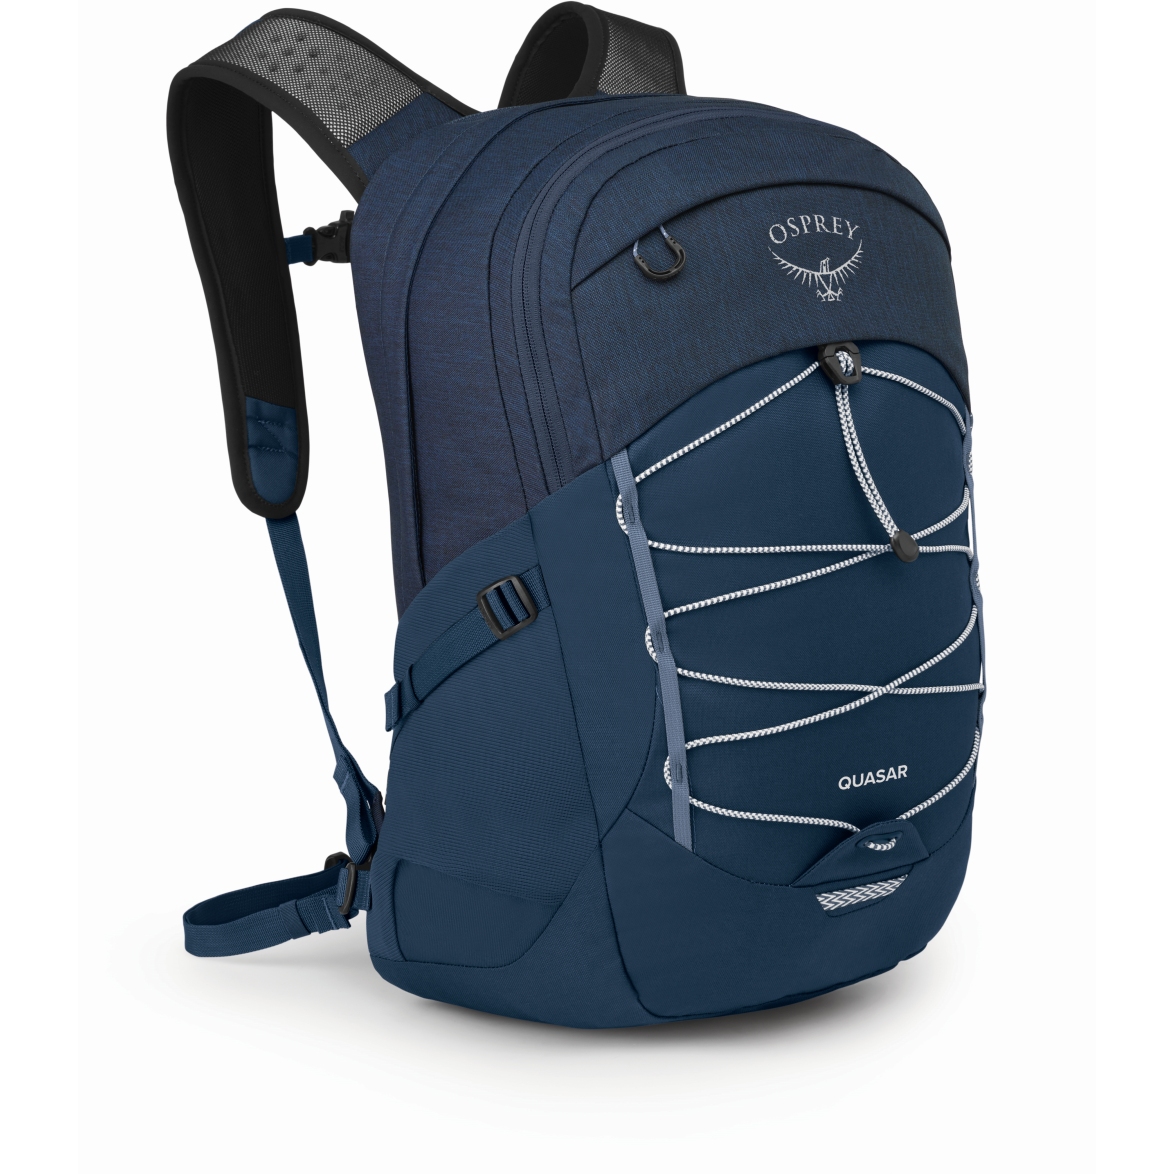 Picture of Osprey Quasar 26 Backpack - Atlas Blue Heather